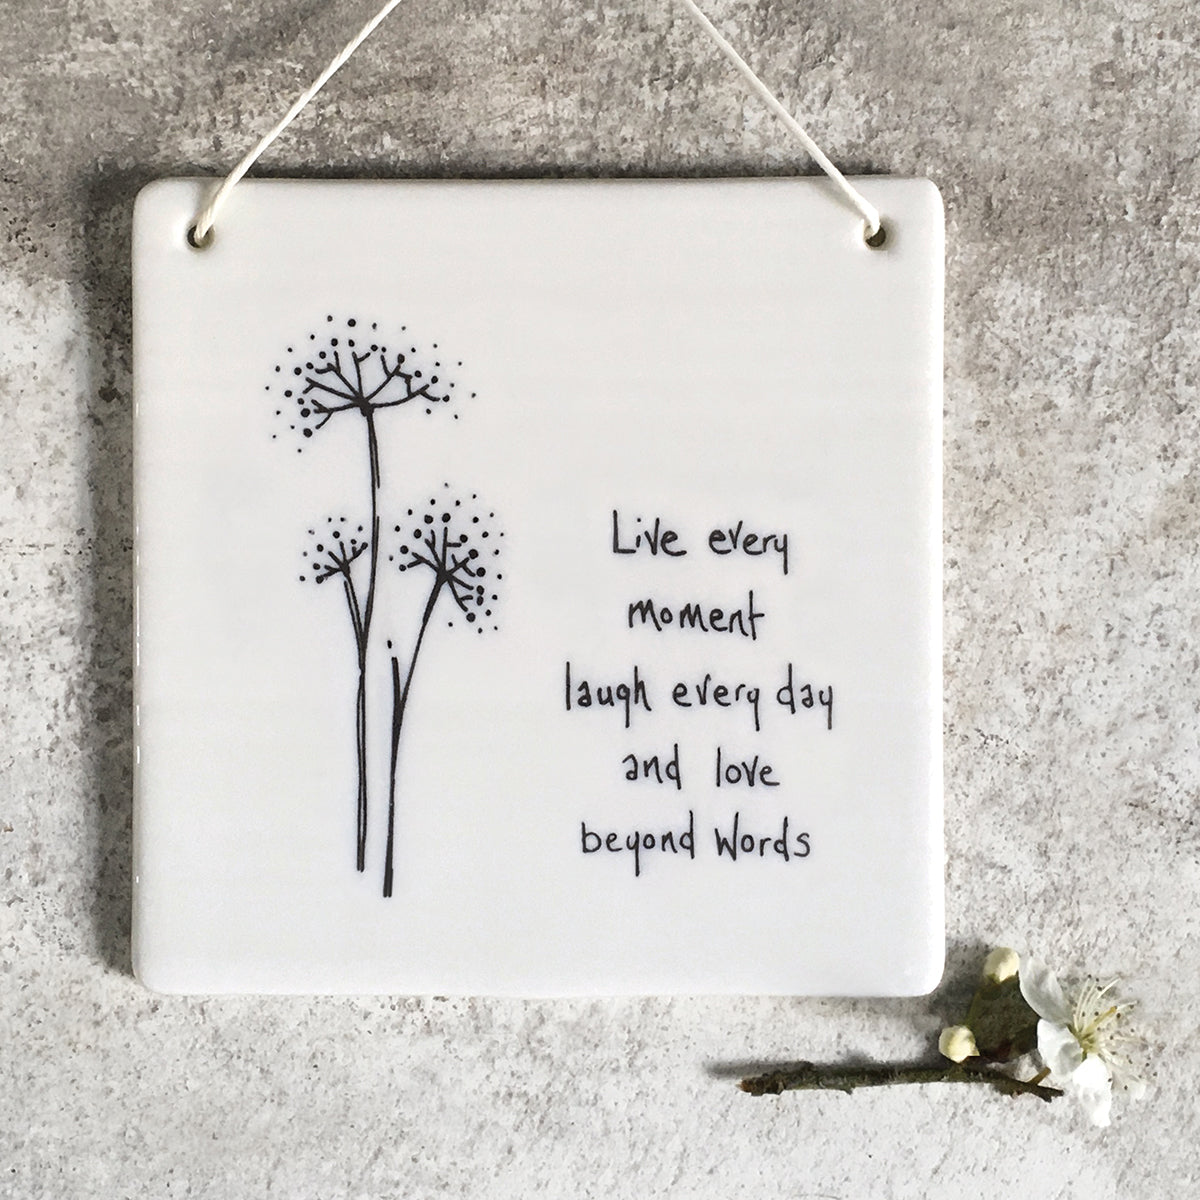 East of India Porcelain square hanging plaque - Live Every Moment